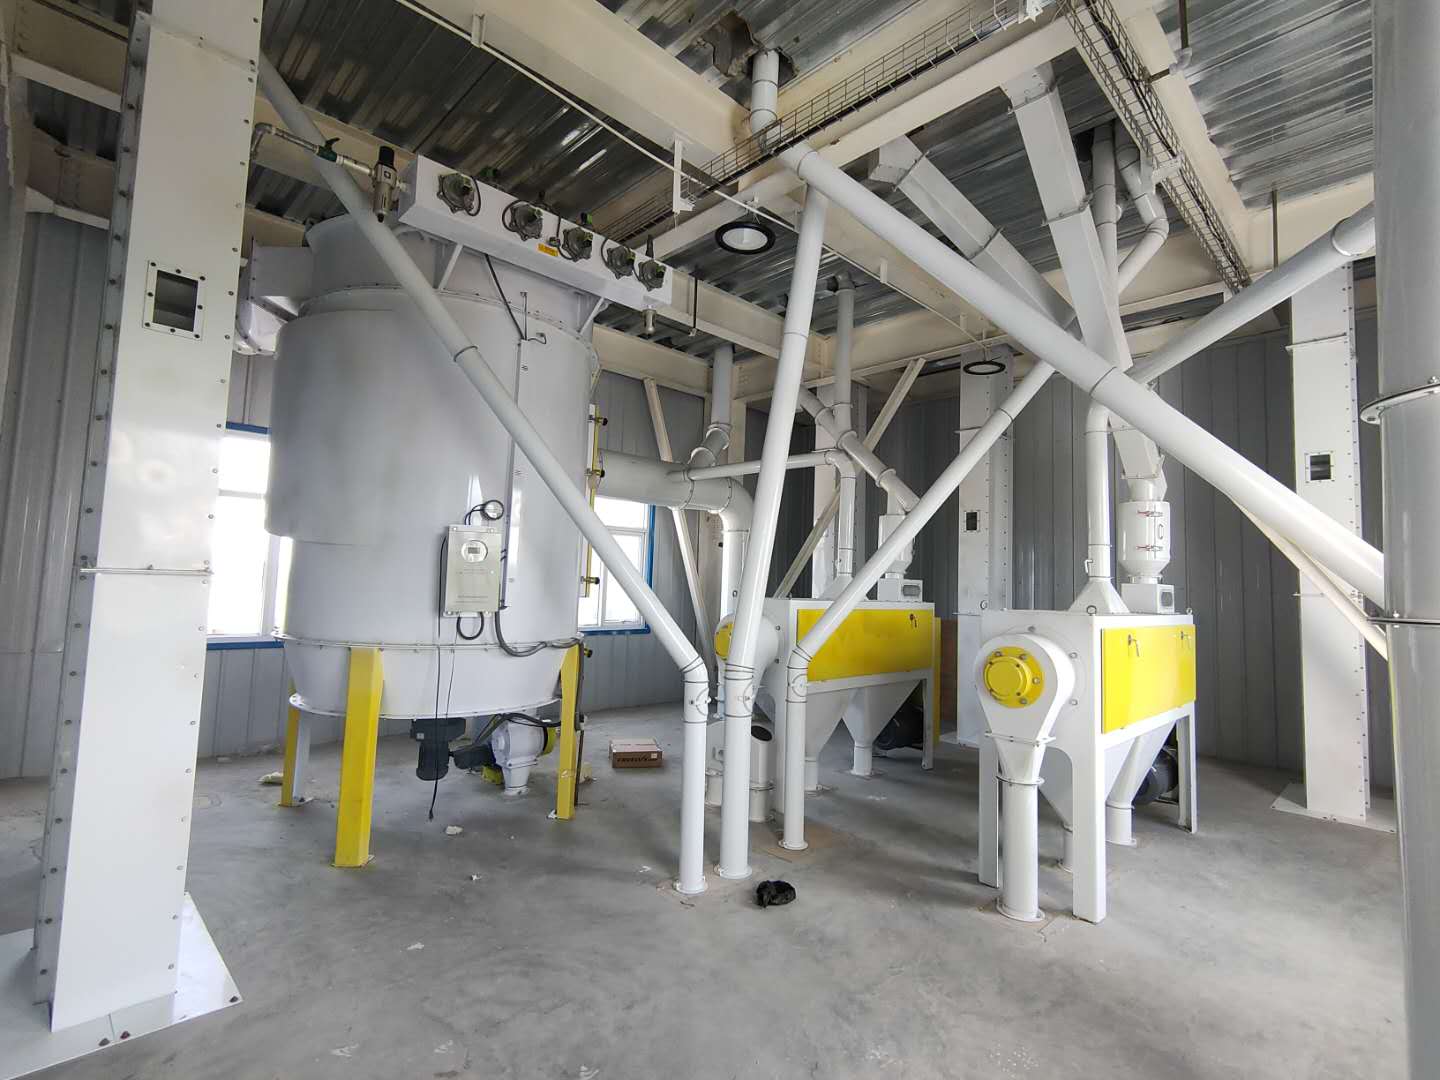 The flour quantitative bagging machine is a complete packaging system for wheat flour production, integrating weighing and packaging.Are you building a new facility or looking to upgrade an existing flour mill? The key to increasing plant productivity and profitability is working with Bratney's team of process engineers and experts to design, build and install your next process plant.